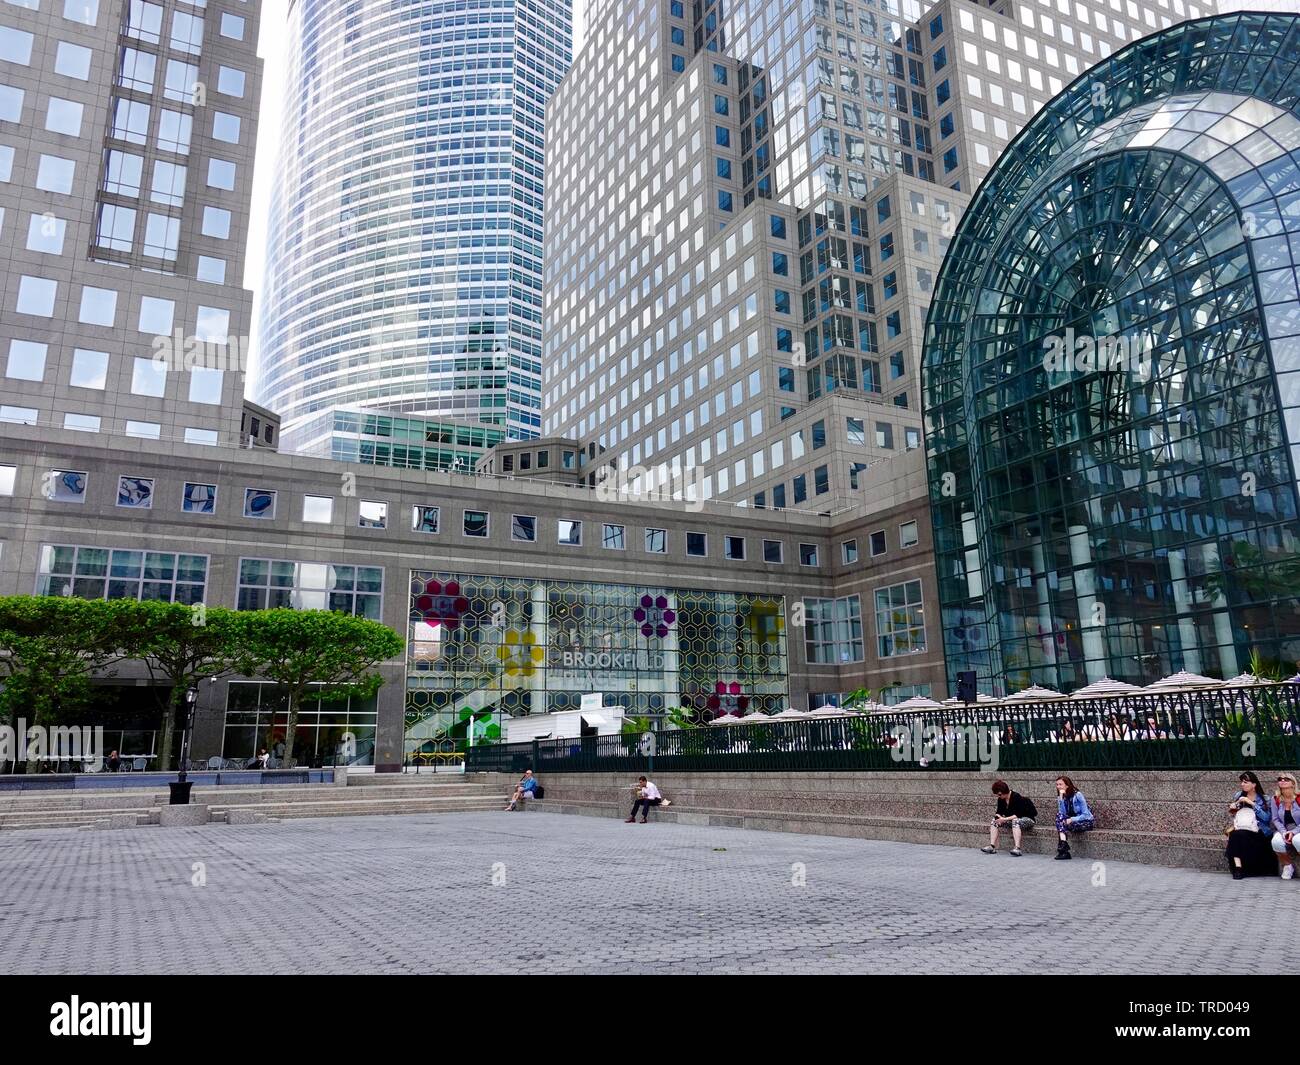 Exterior, harbor side entrance to Brookfield Place Mall showing lots of glass and architecturally interesting buildings, Lower Manhattan, NY, NY, USA Stock Photo